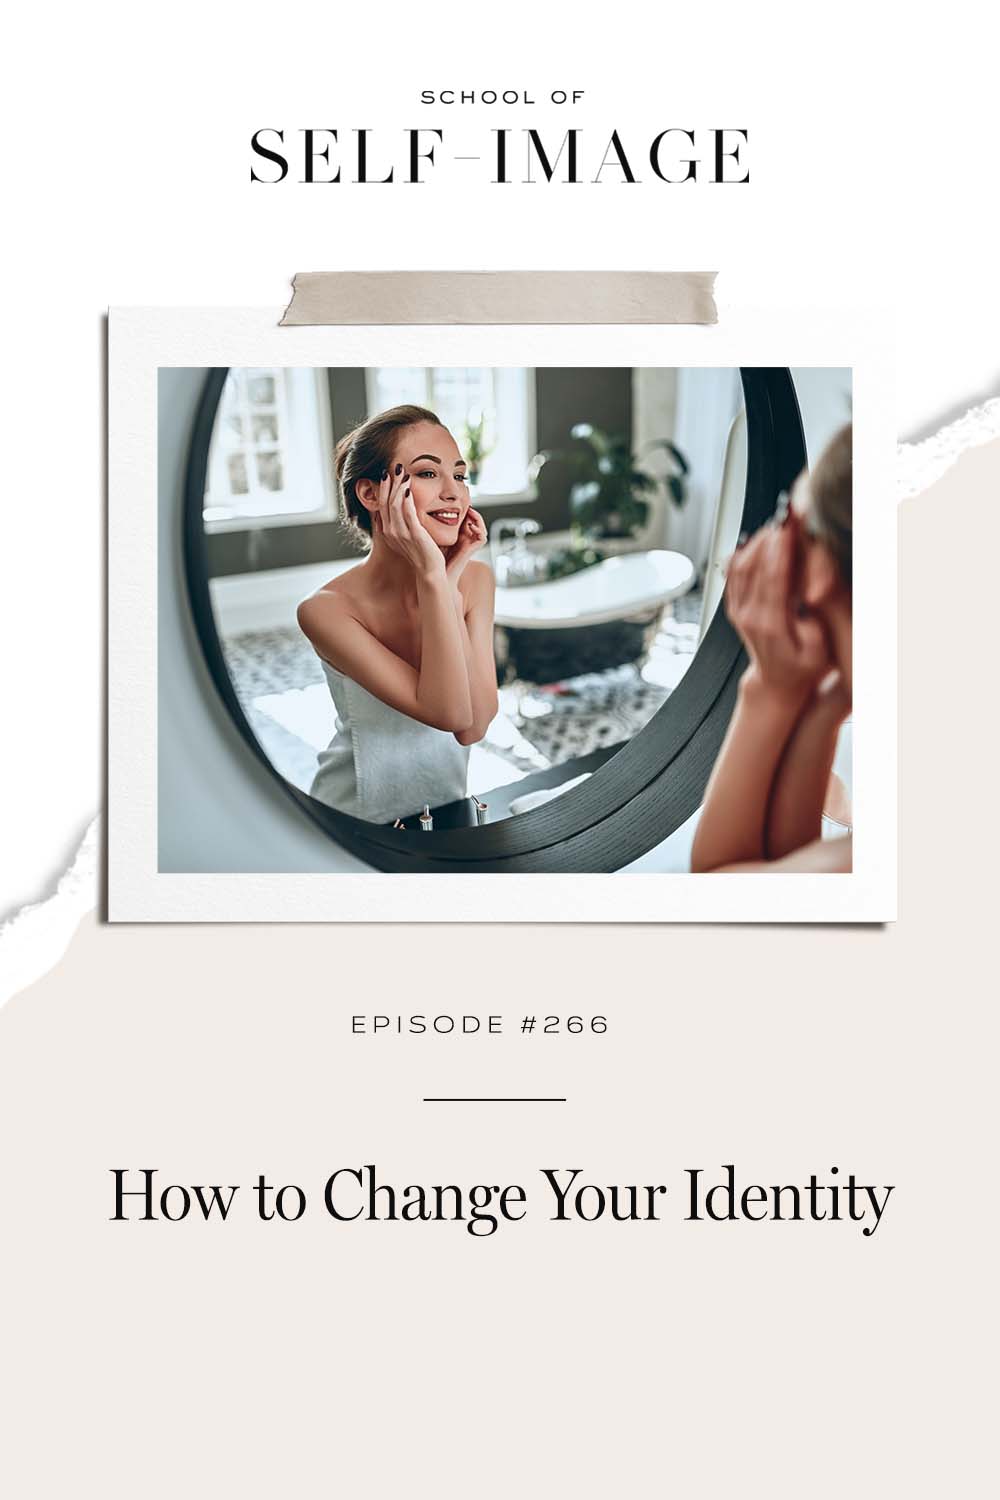 How to change your identity to be anything you want to be.